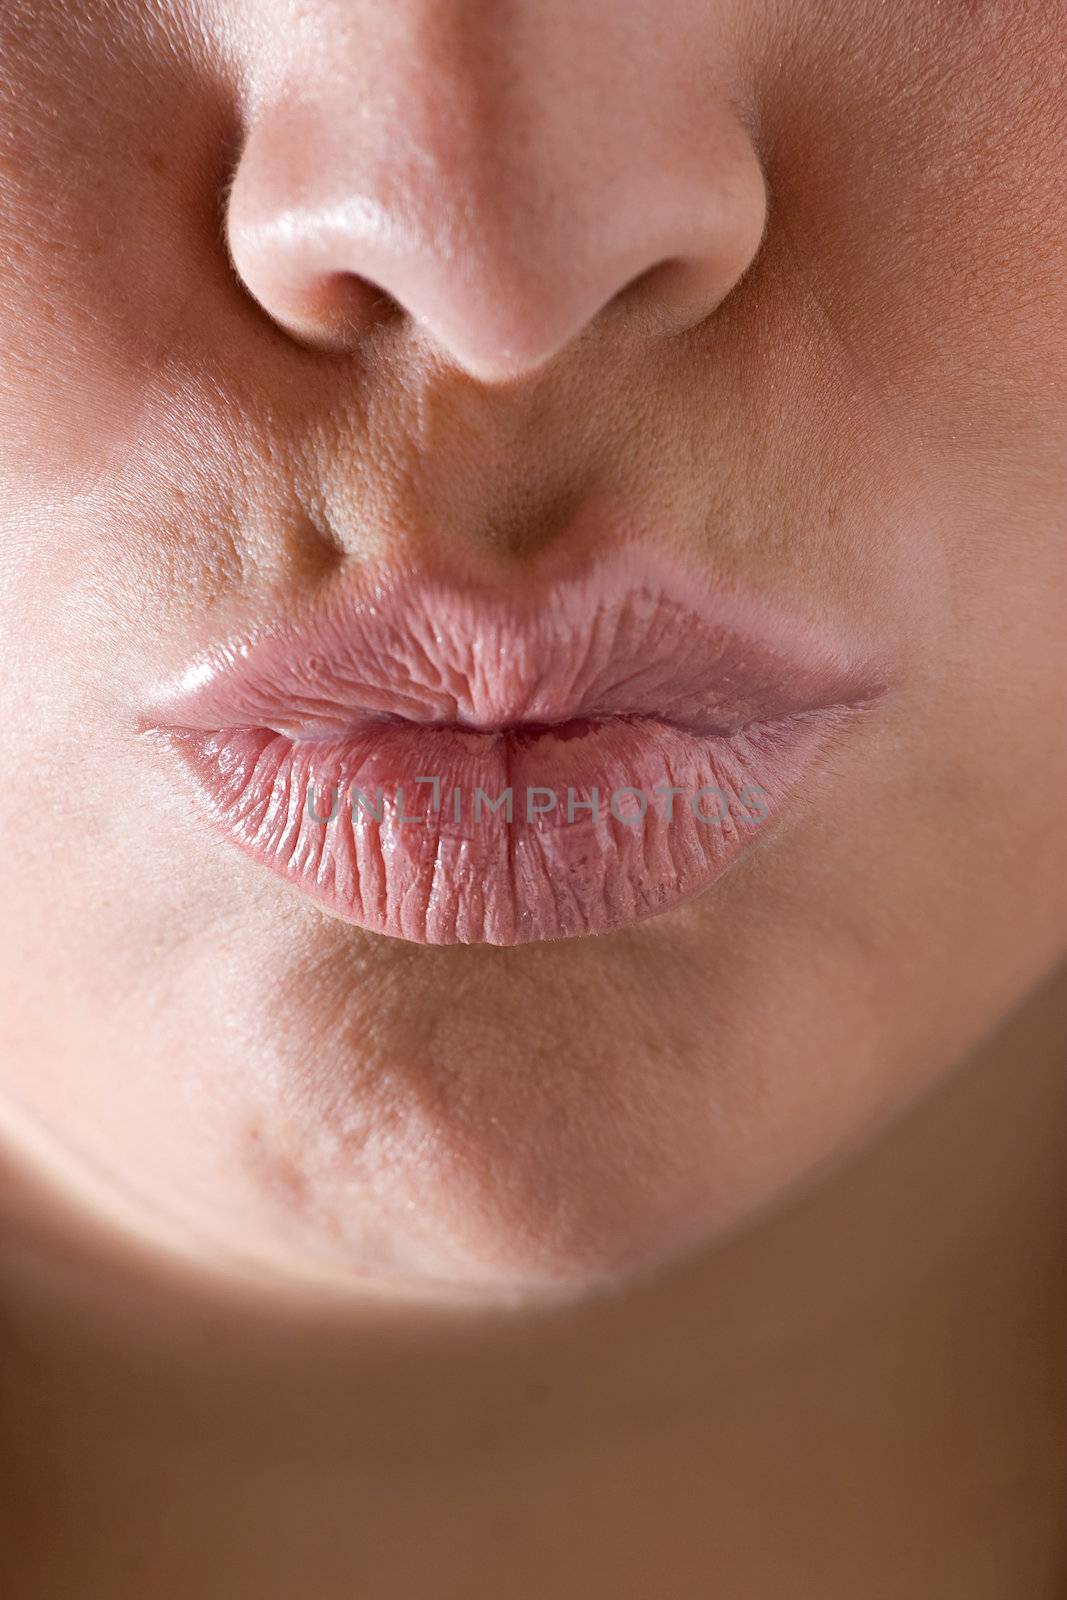 Closeup of a womans full lips puckered up and ready to kiss.